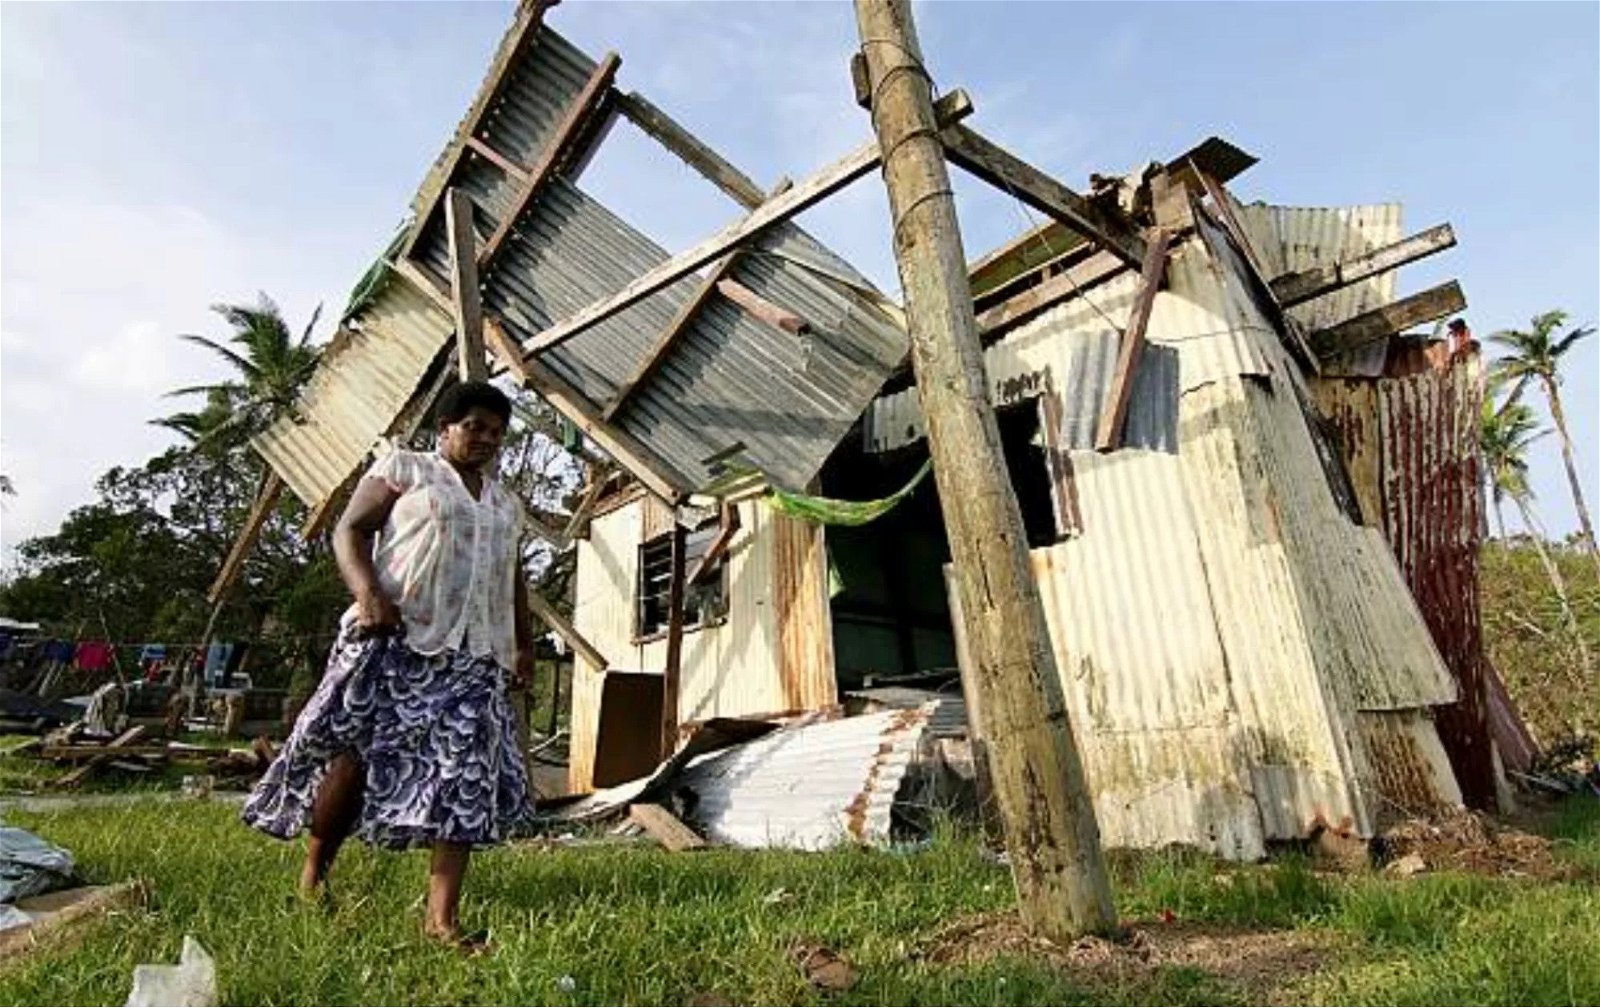 PHOTO of A woman from the village of Namena in Tailevu walks in front of her damaged house after Cyclone Winston swept through the area